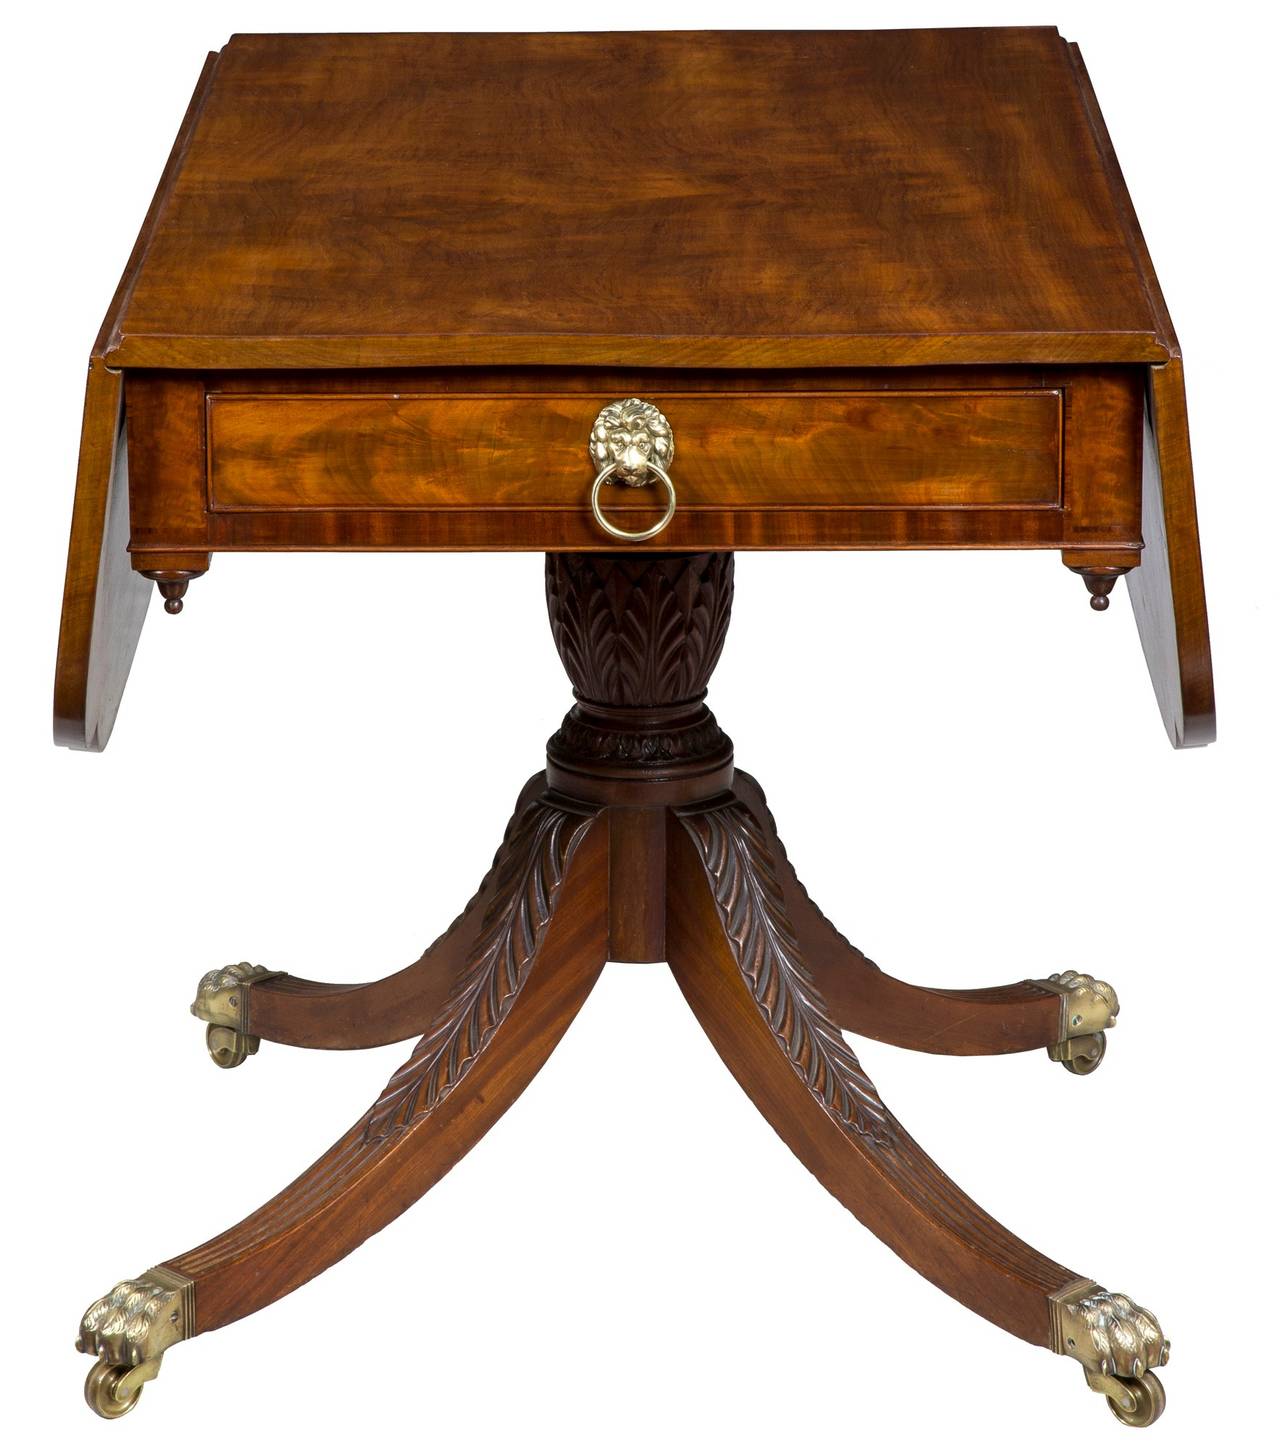 For the grouping of these drop-leaf tables that were produced in New York, this table is probably at the top of the class. The best of this form has acanthus leaf carving that is very well developed and scooped out under each leaf. Some have